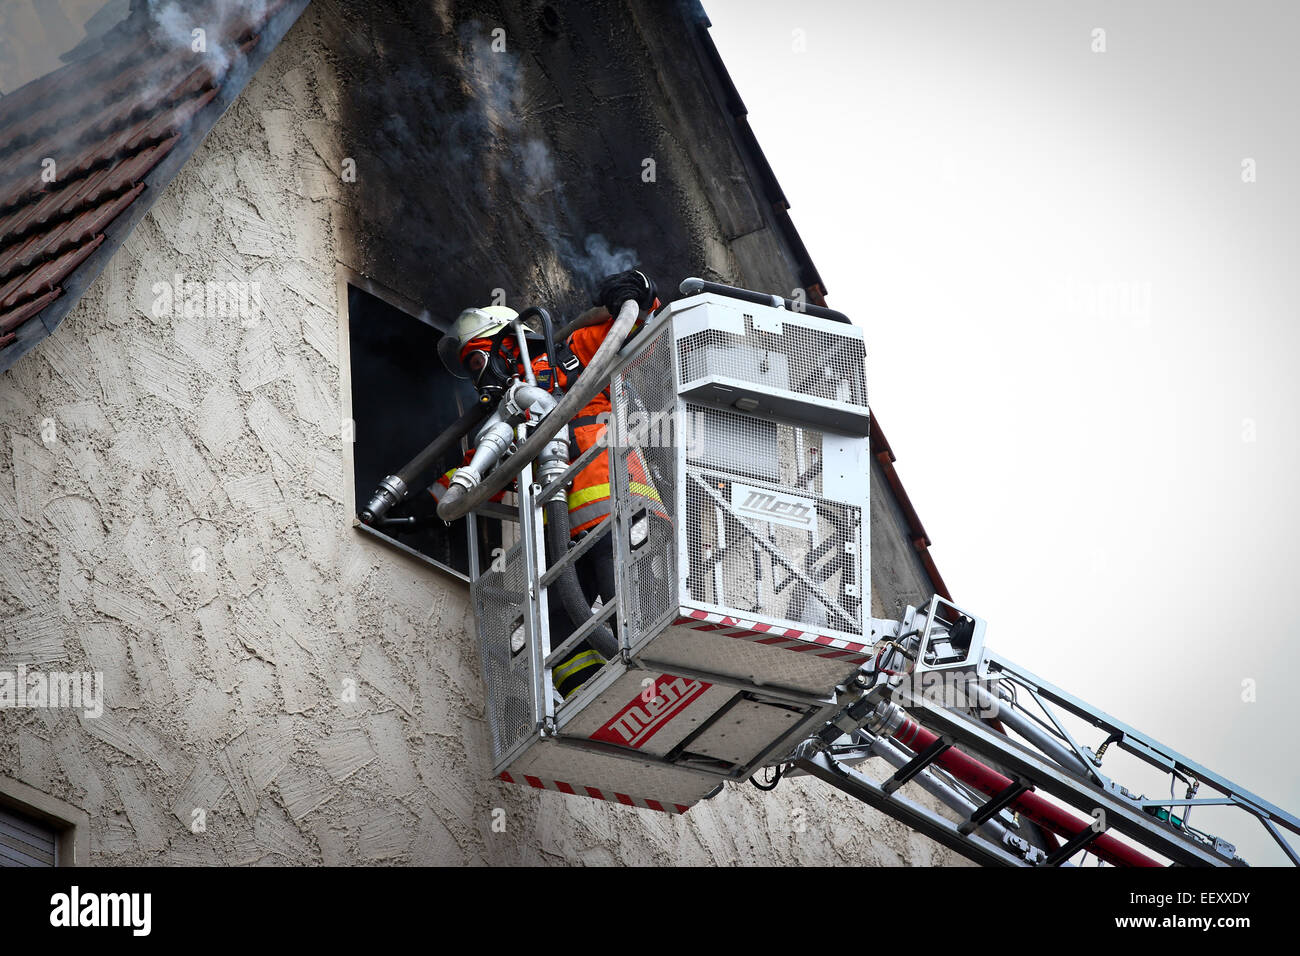 Dwelling fire, Oppenweiler, Germany, Oct. 6, 2014. Stock Photo